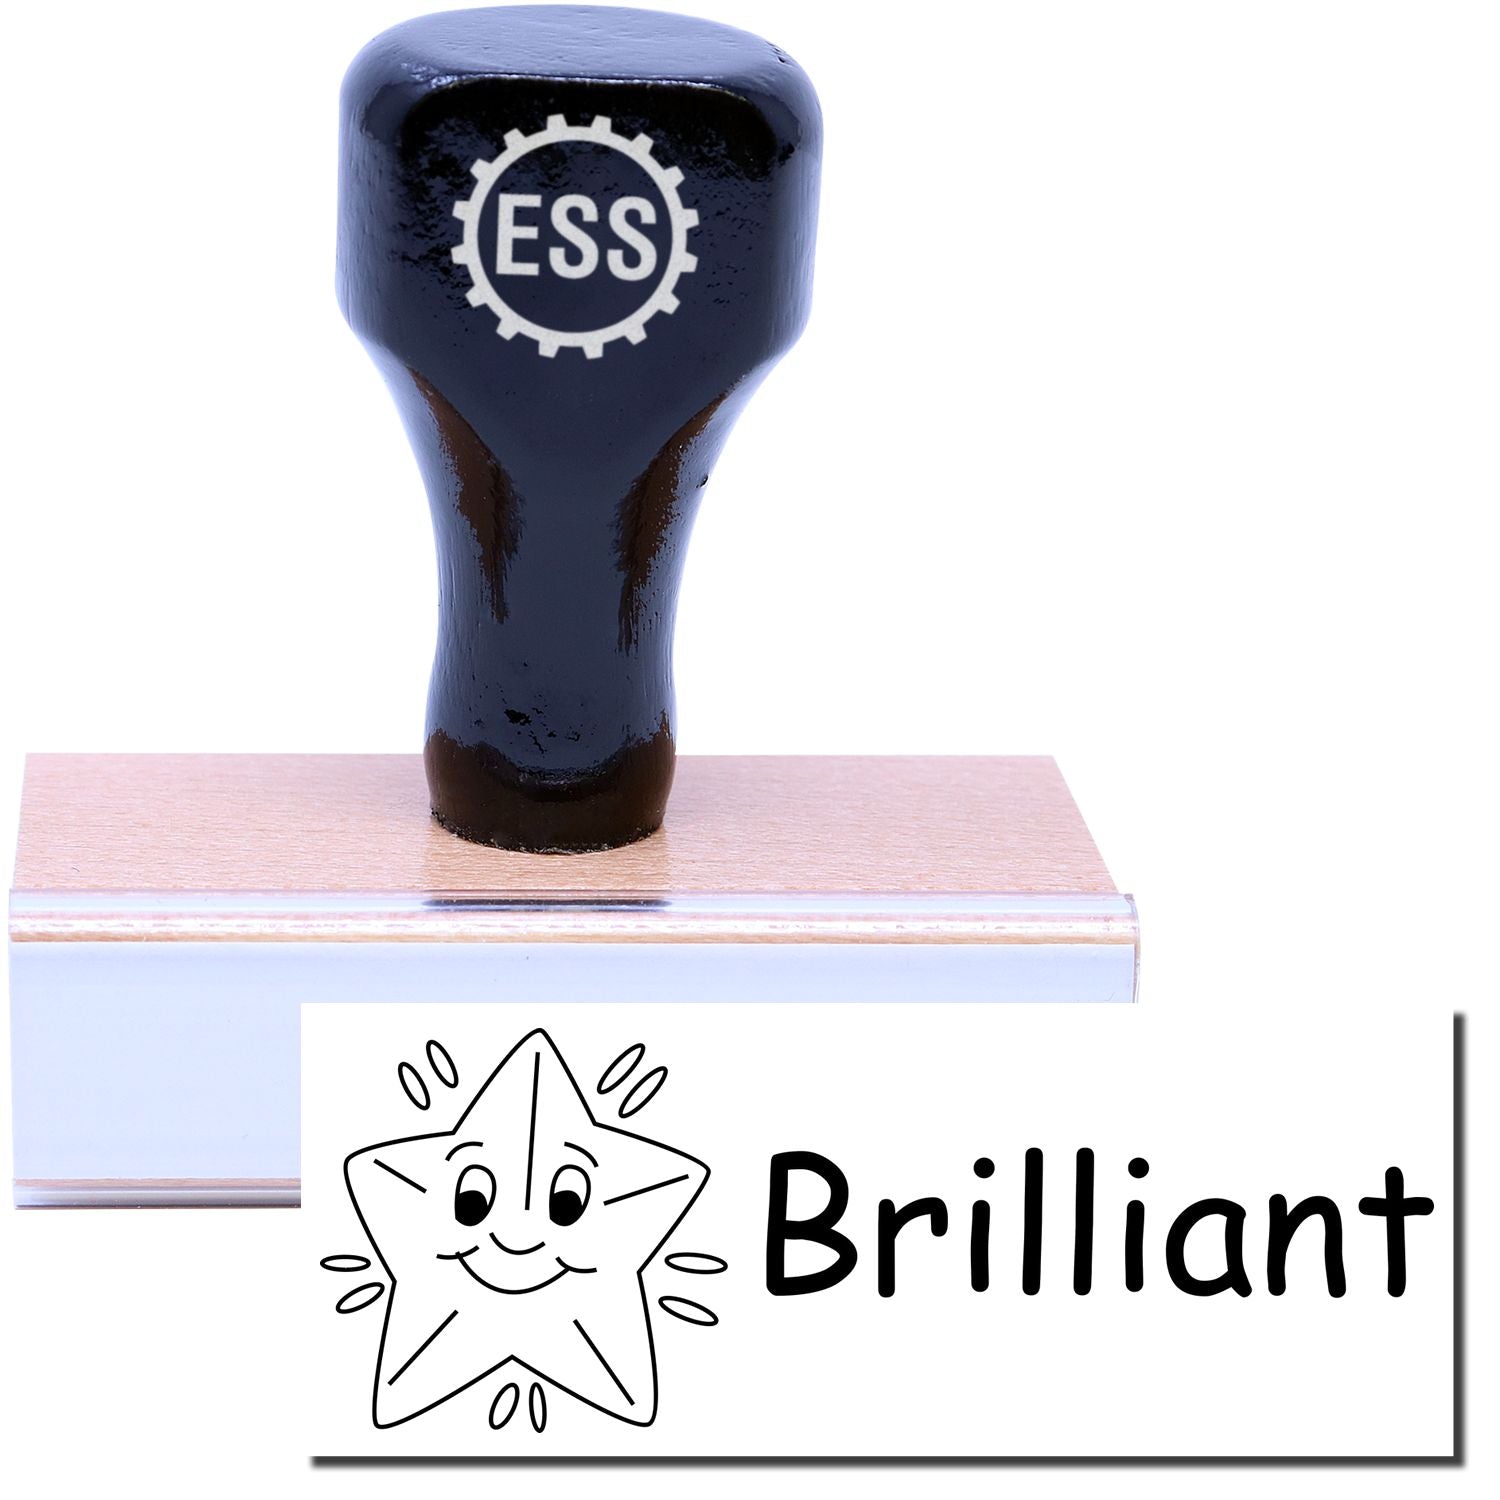 A stock office rubber stamp with a stamped image showing how the text "Brilliant" with a graphic of a smiling shining star is displayed after stamping.